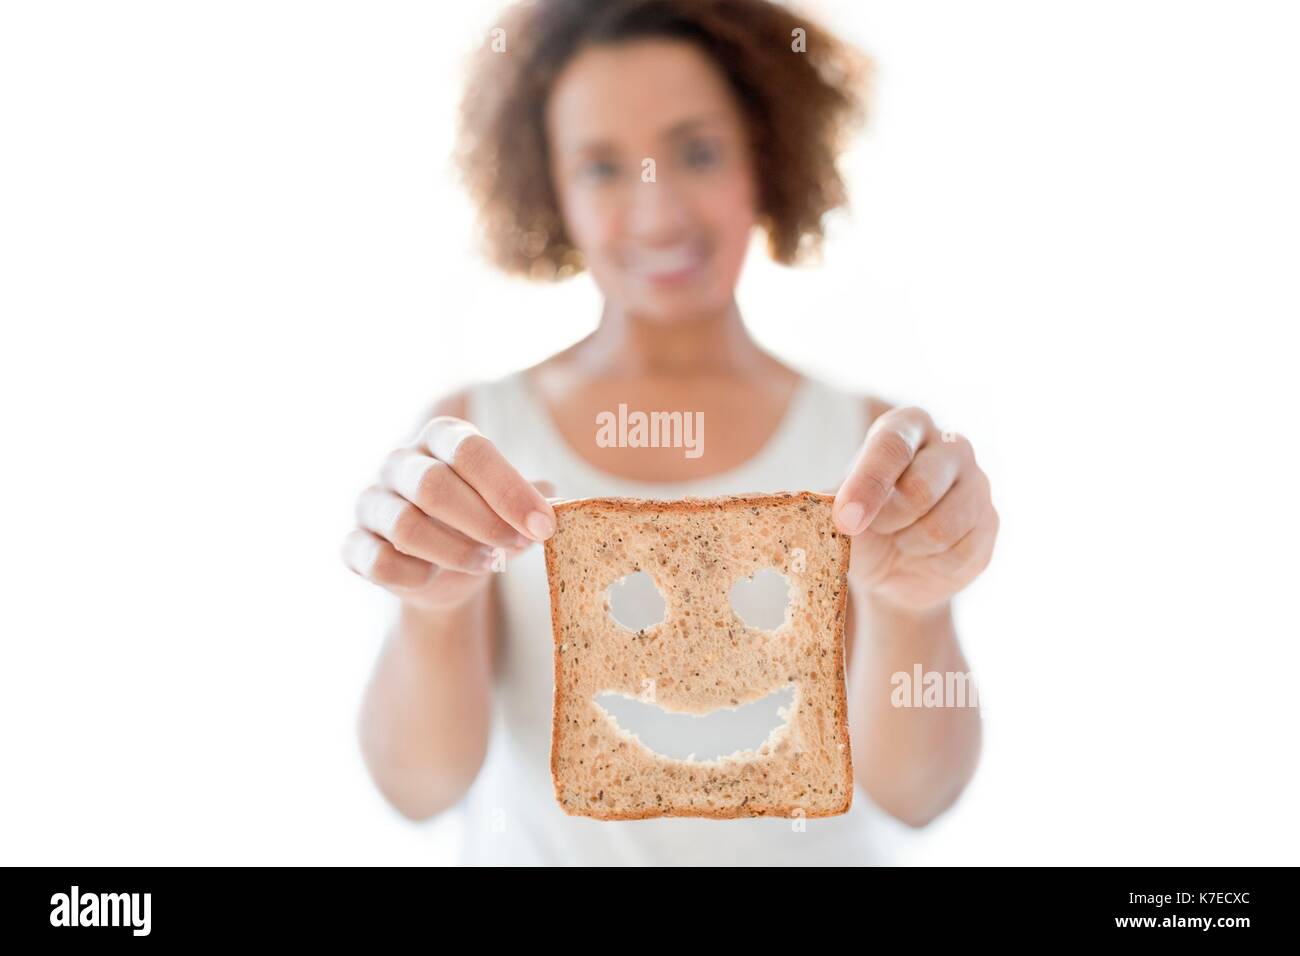 Mid adult woman holding bread with smiley face. Stock Photo